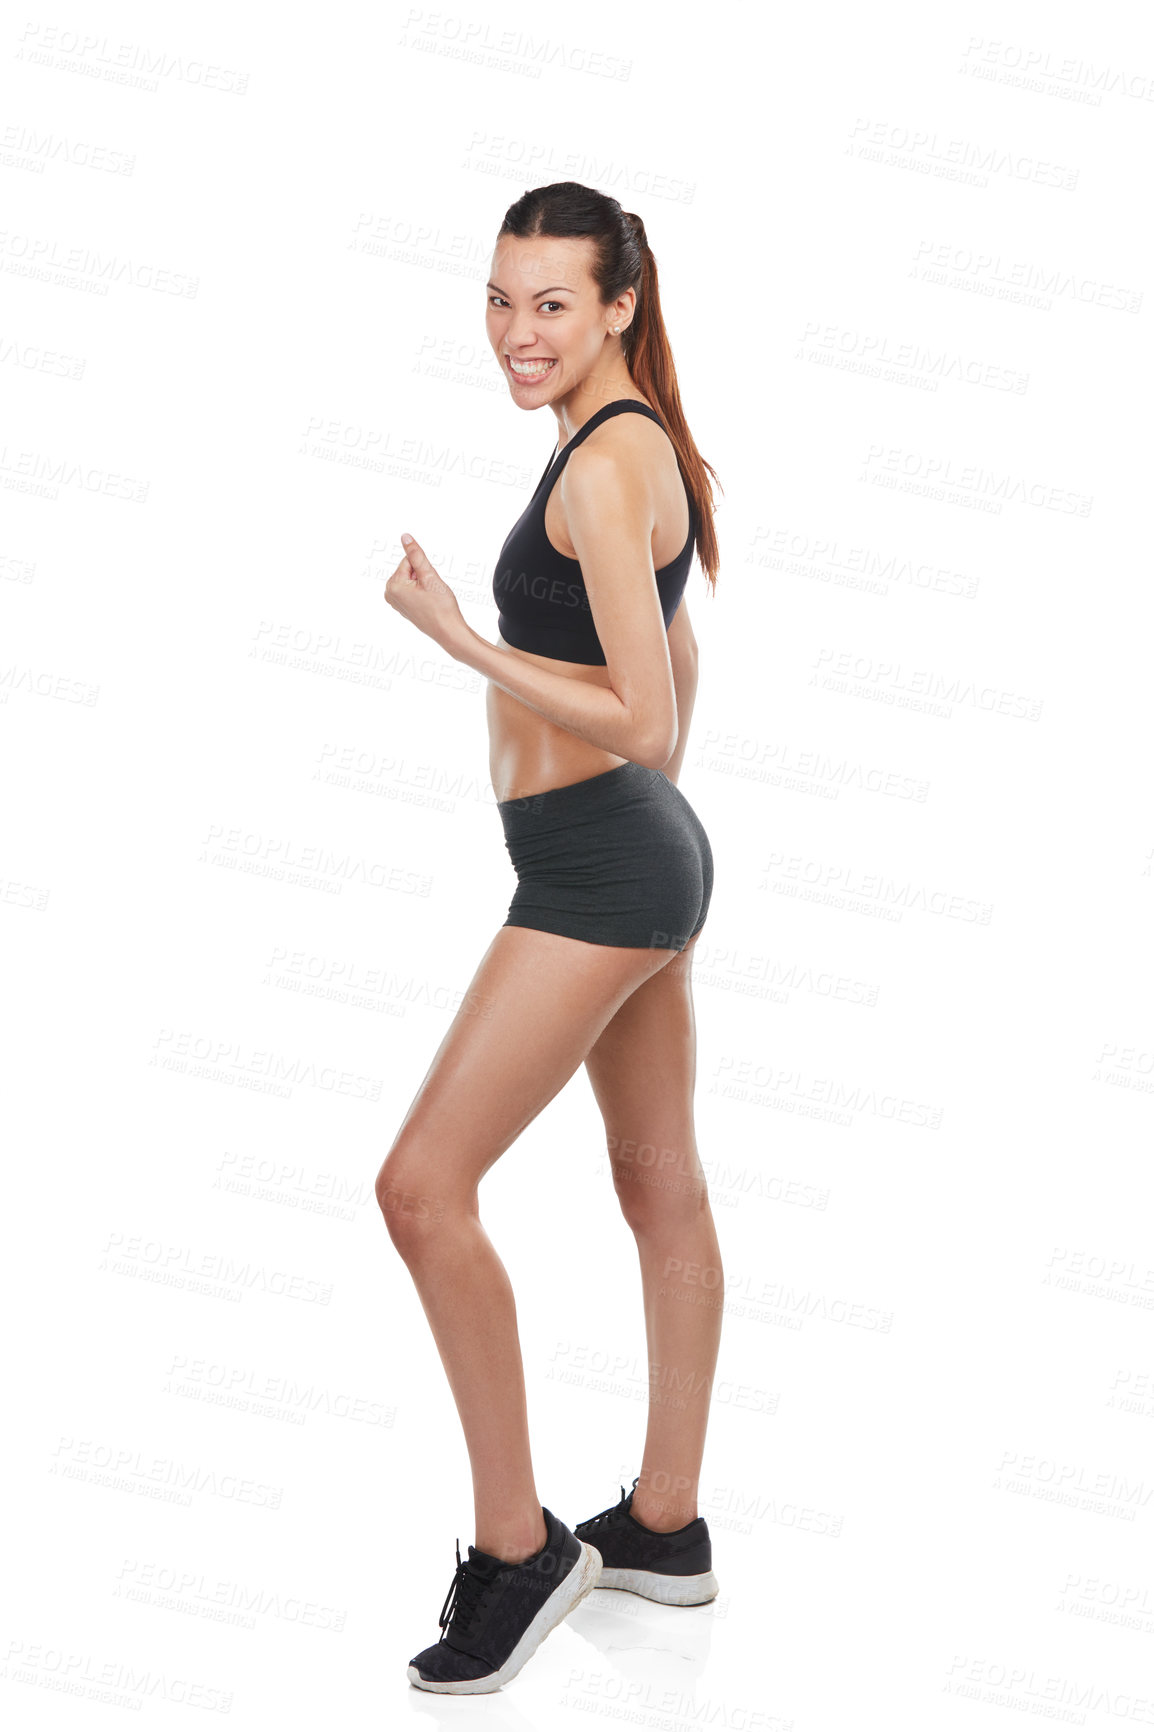 Buy stock photo Full length portrait of a fit, young woman flexing in sportswear isolated on white